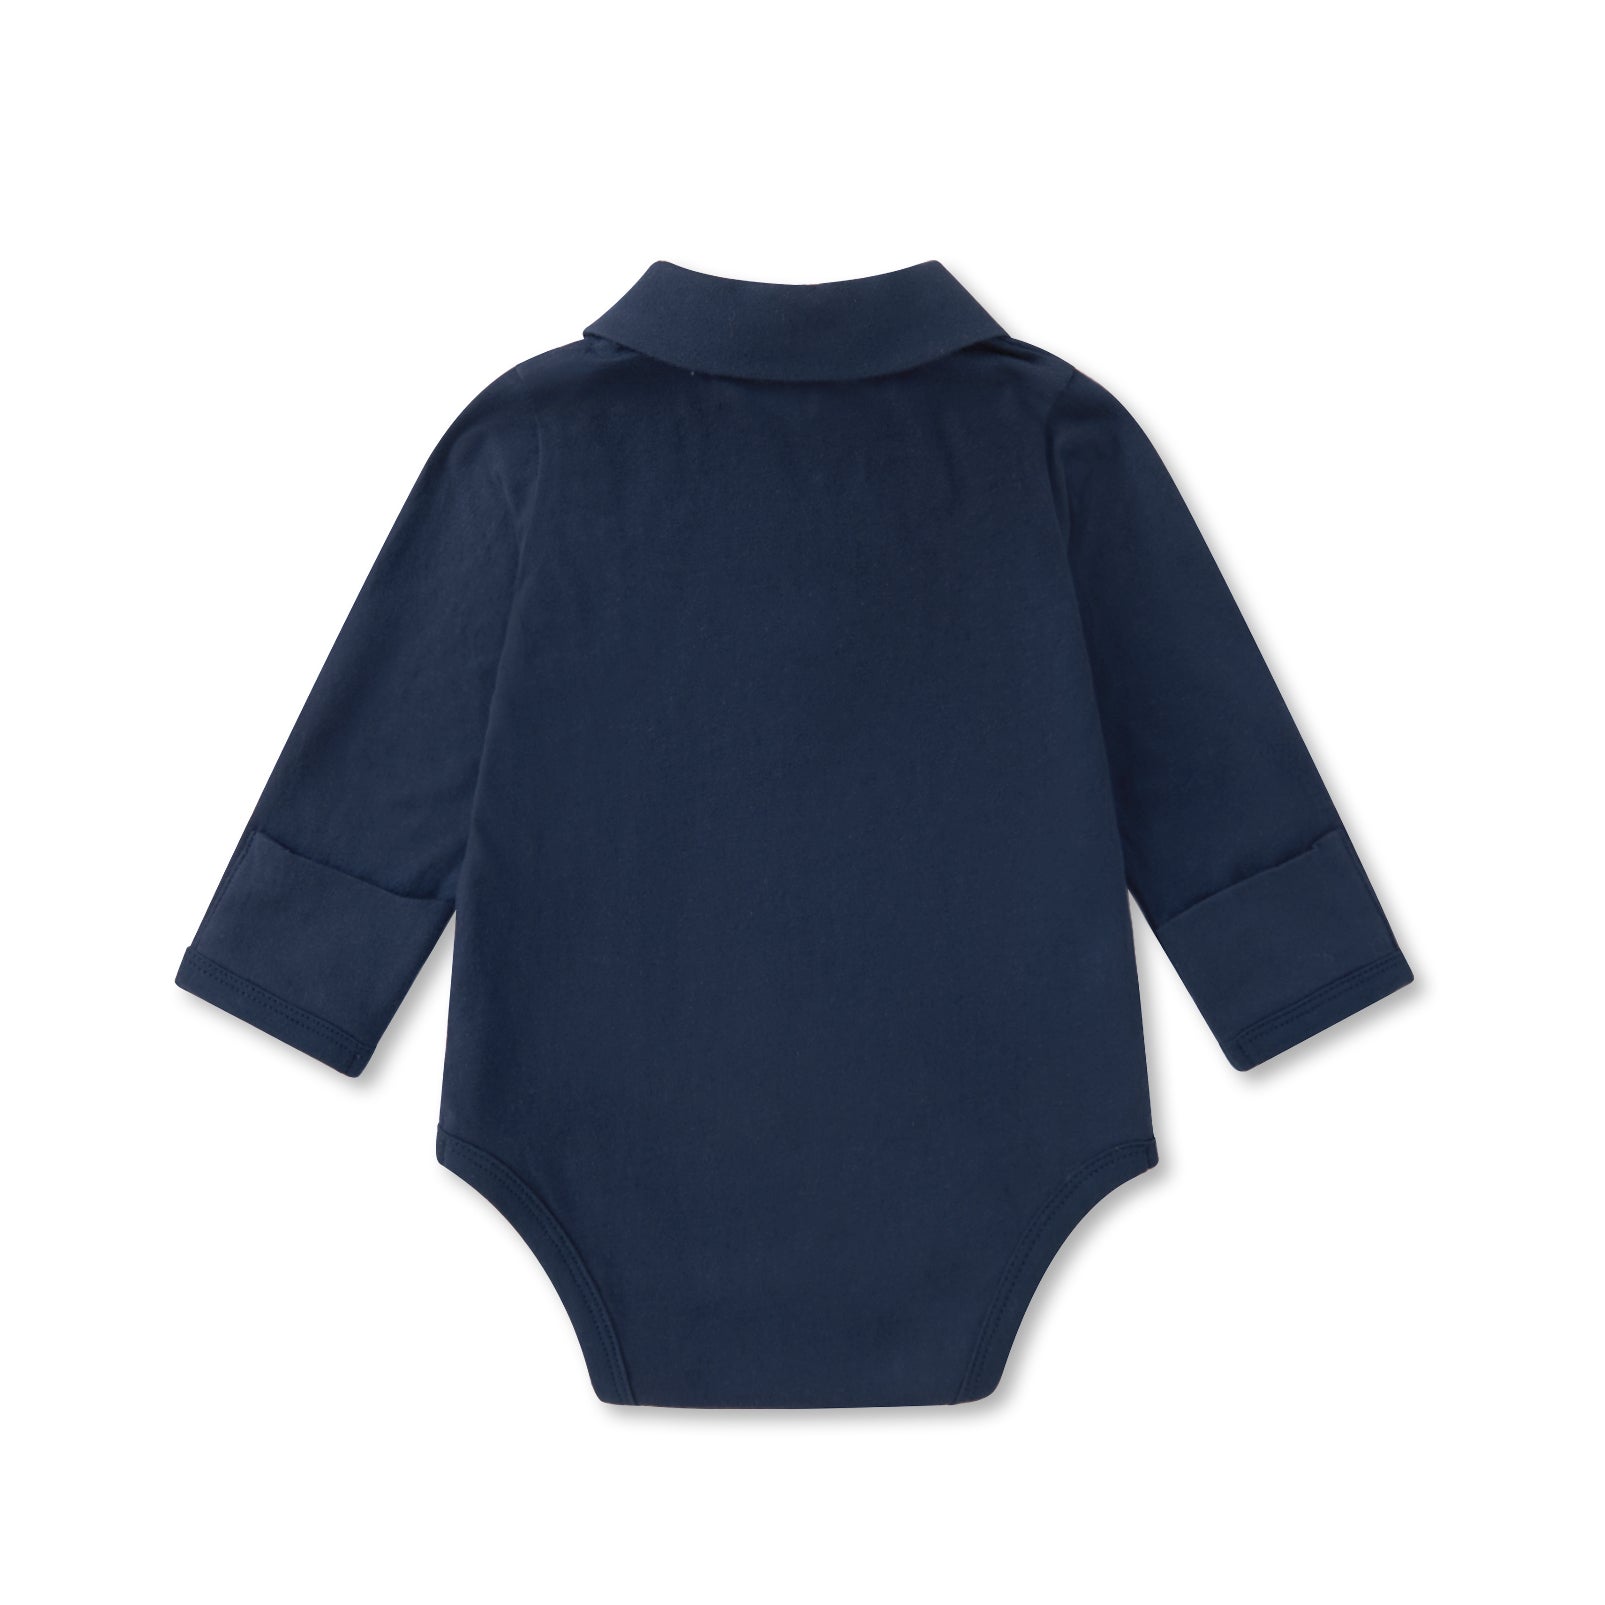 pureborn Baby Boys Bodysuit Long Sleeve Soft Cotton Romper One-piece Outfit